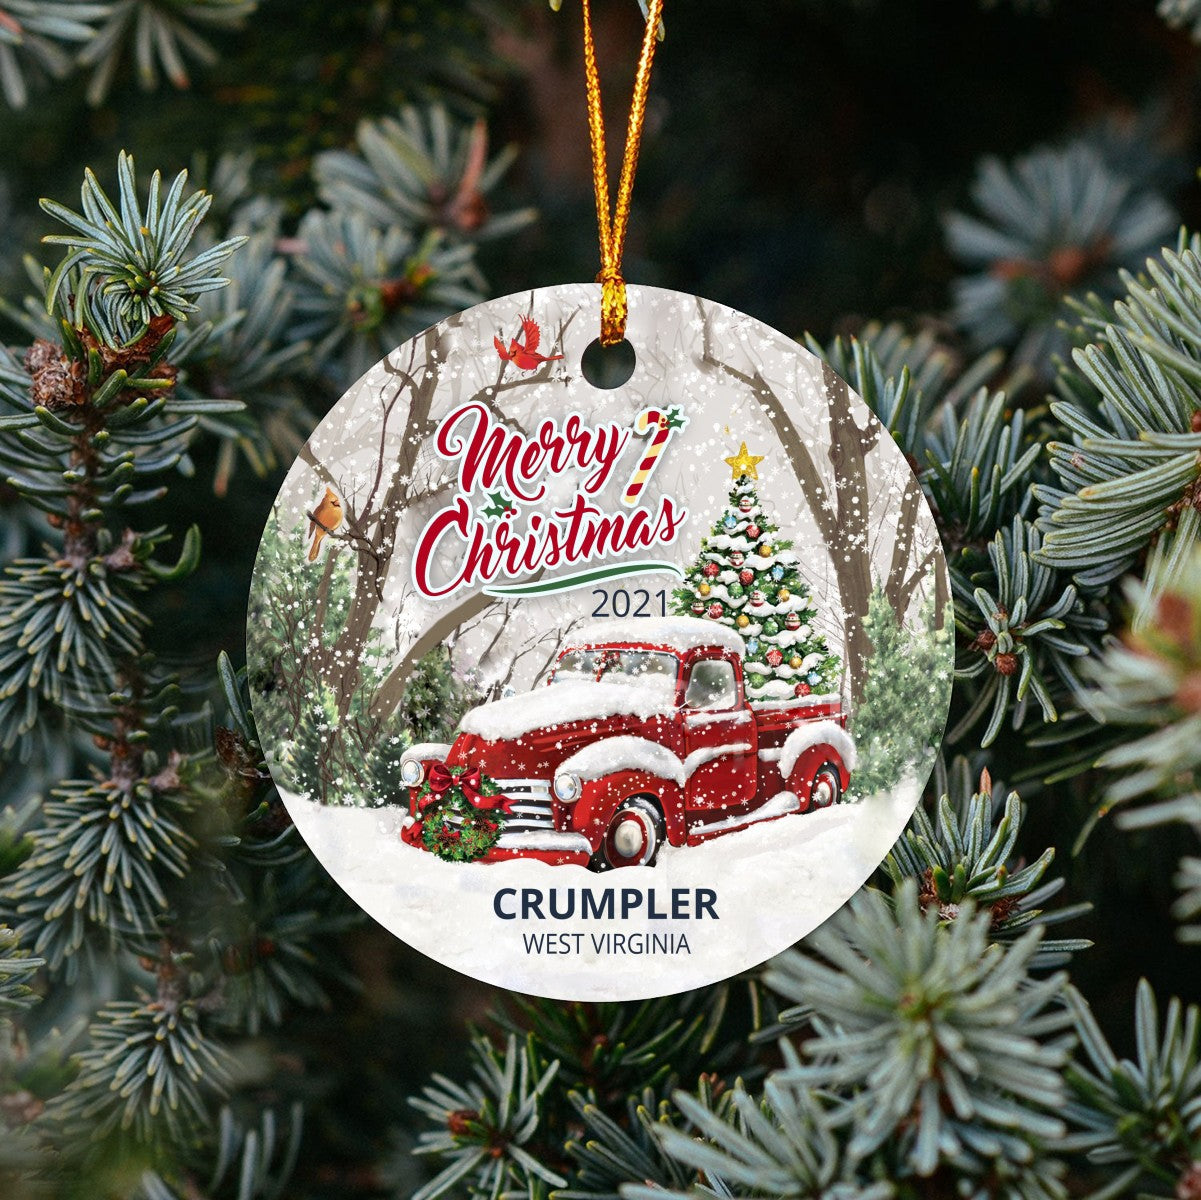 Christmas Tree Ornaments Crumpler - Ornament With Name City, State Crumpler West Virginia WV Ornament - Red Truck Xmas Ornaments 3'' Plastic Gift For Family, Friend And Housewarming